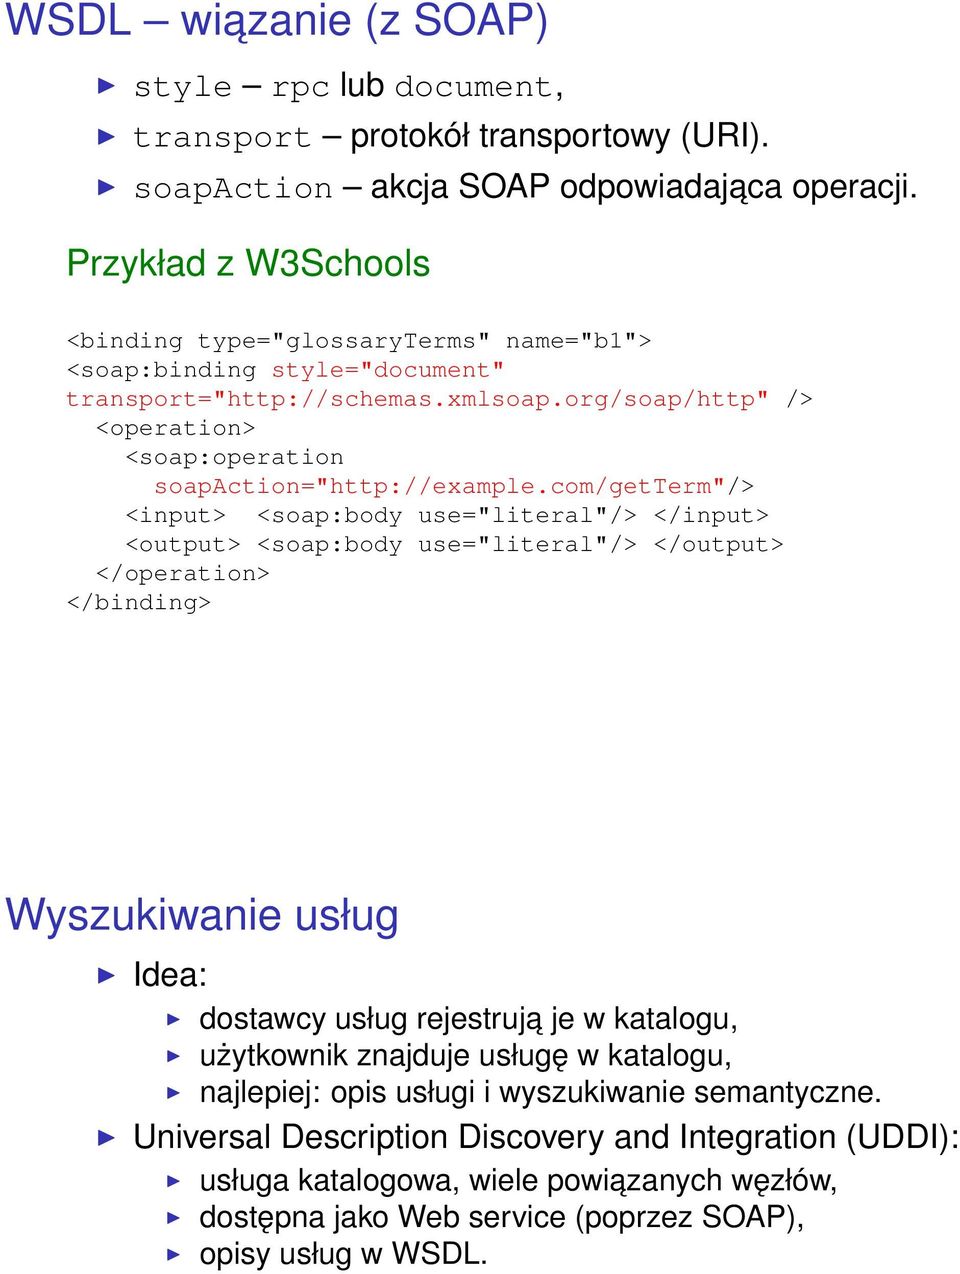 org/soap/http" /> <operation> <soap:operation soapaction="http://example.